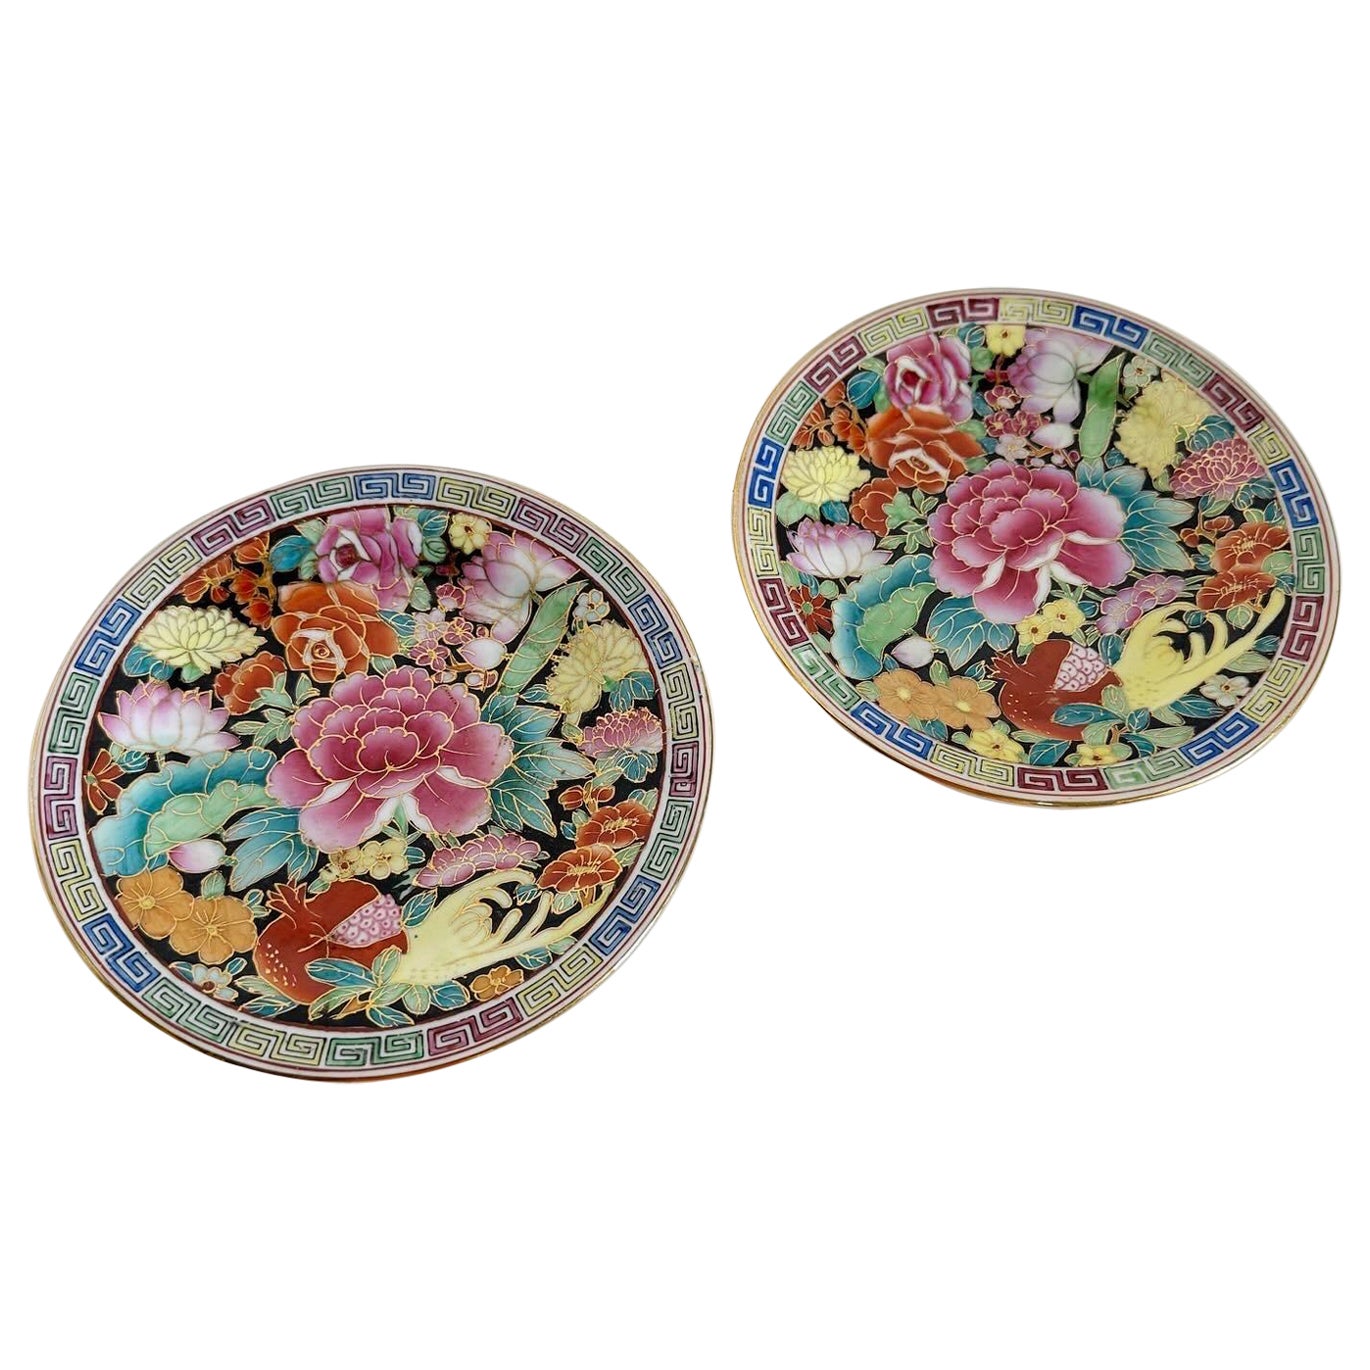 Vintage Chinese Hand Painted Porcelain Plates - a Pair For Sale